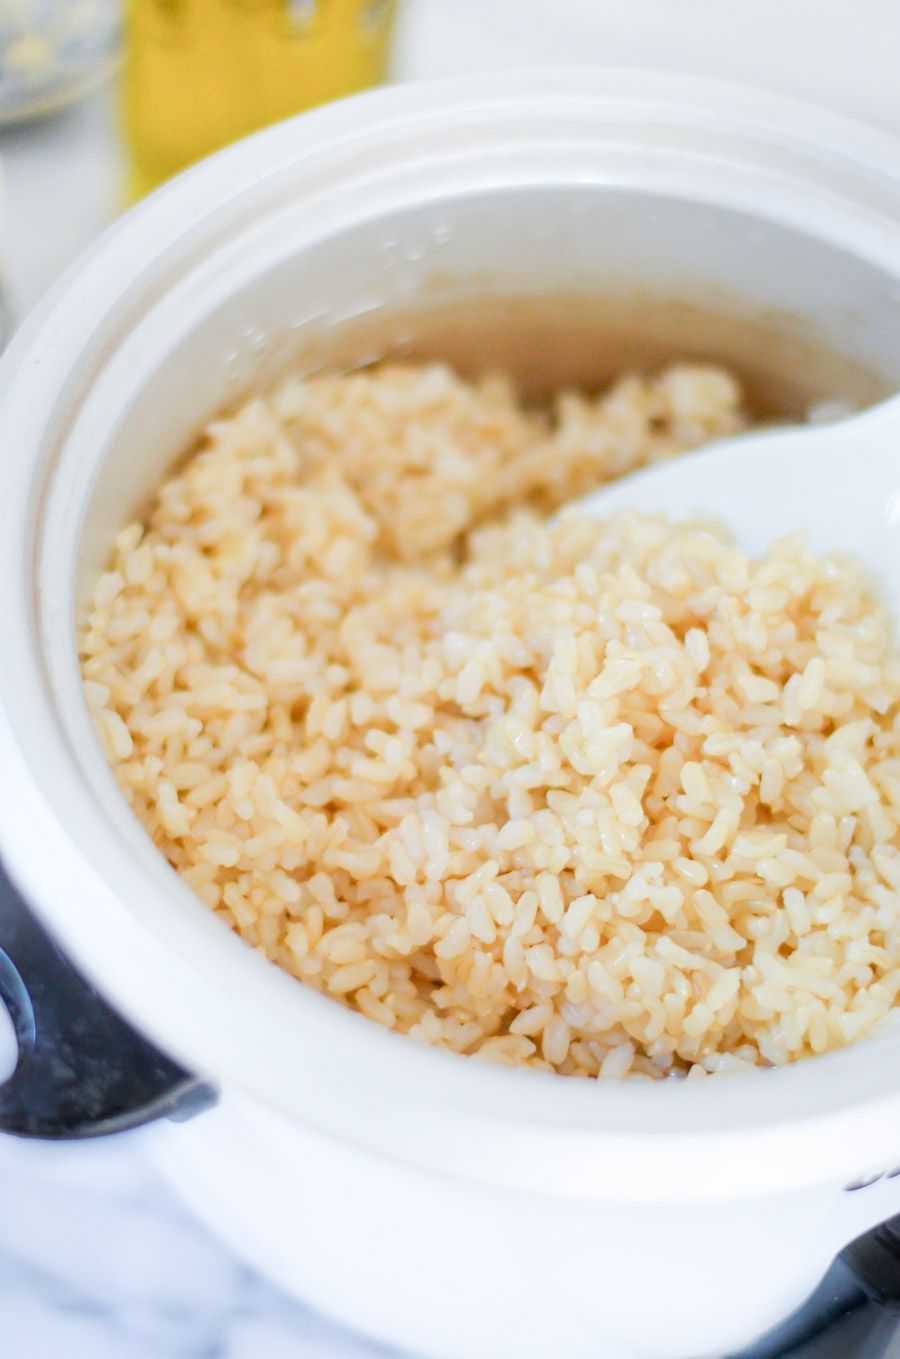 https://www.lucismorsels.com/wp-content/uploads/2015/09/How-to-Make-Rice-in-Rice-Cooker-Ratio-3.jpg